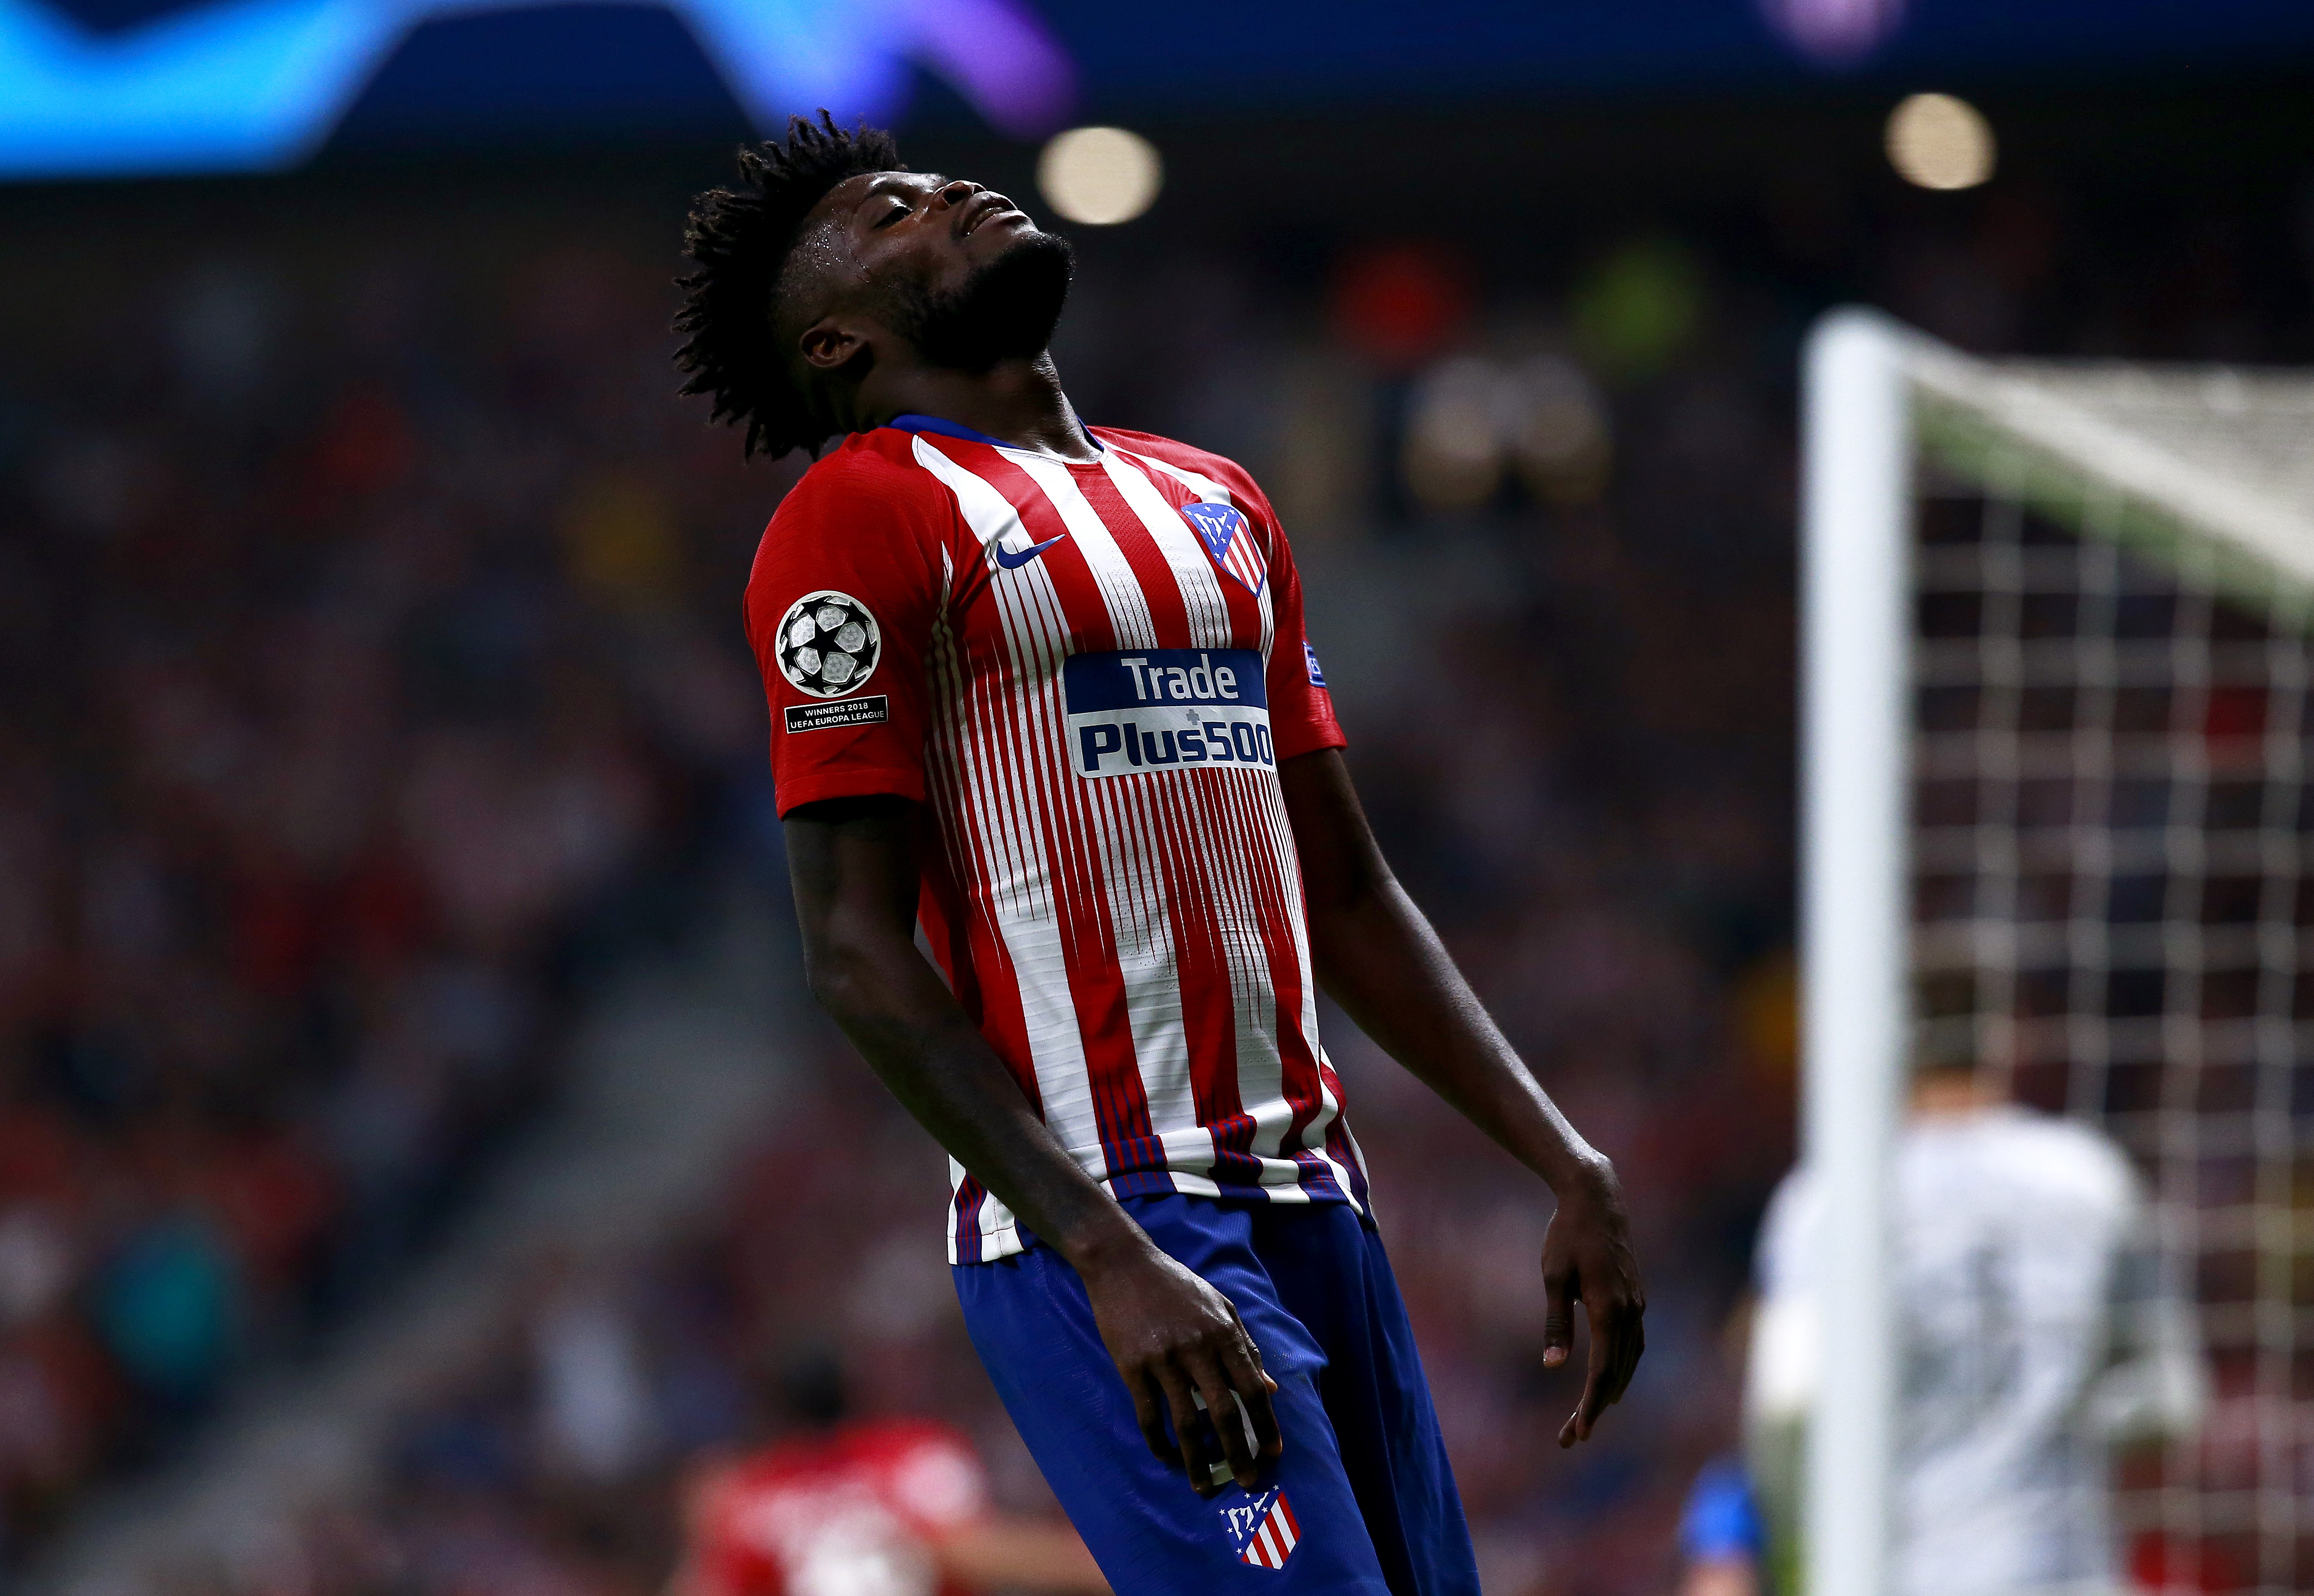 MADRID, SPAIN - OCTOBER 03:  Thomas Partey of Atletico Madrid reacts during the Group A match of the UEFA Champions League between Club Atletico de Madrid and Club Brugge at Estadio Wanda Metropolitano on October 3, 2018 in Madrid, Spain.  (Photo by Gonzalo Arroyo Moreno/Getty Images)